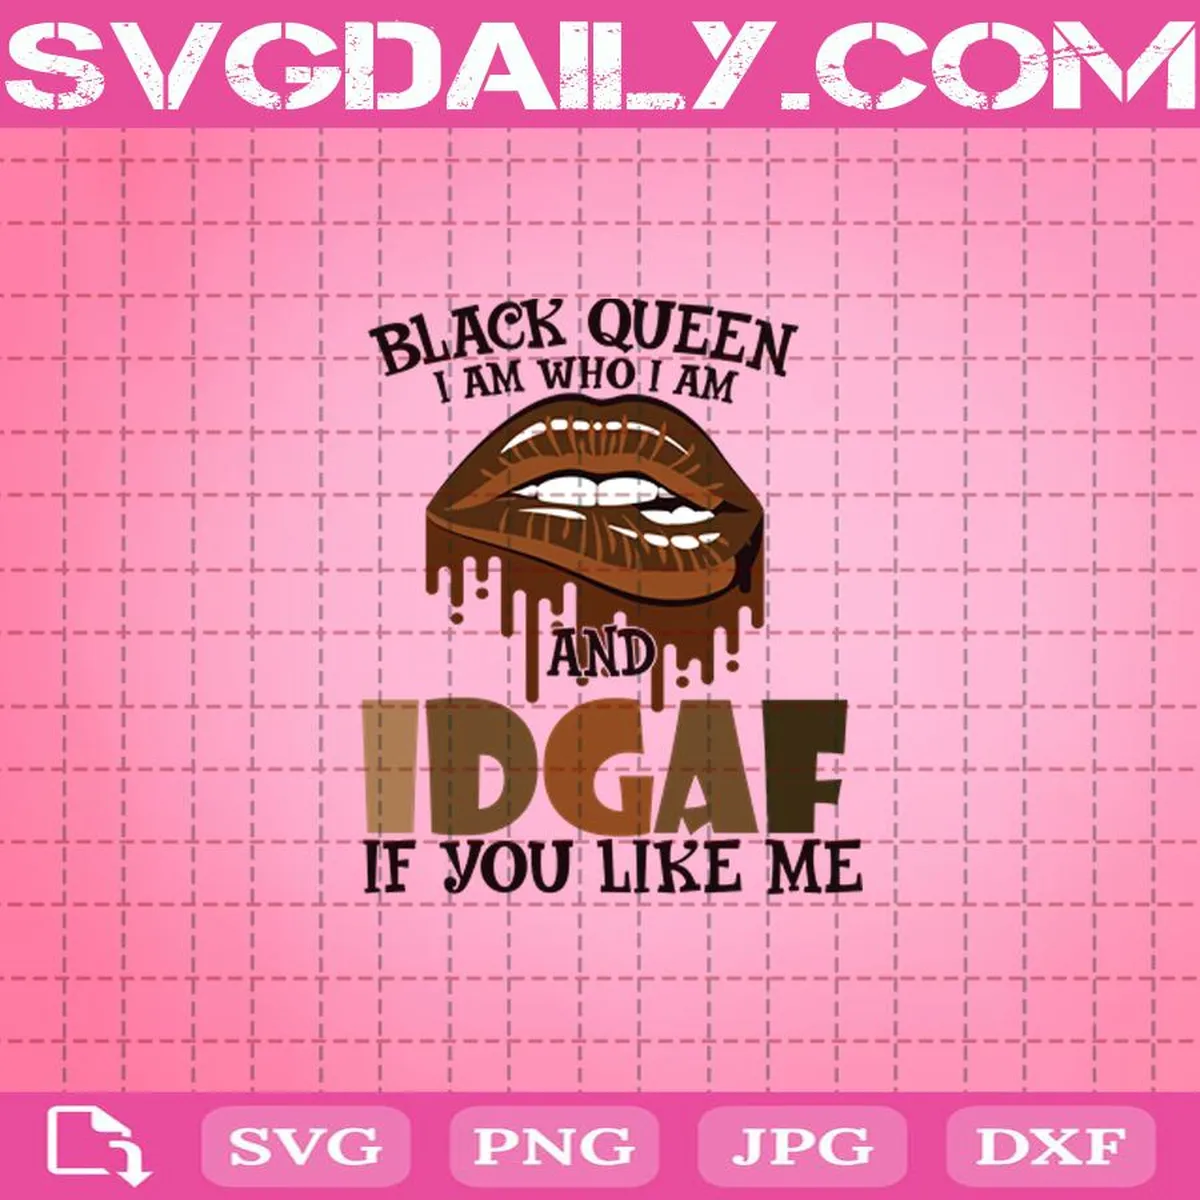 Black Queen I Am Who I Am And IDGAF If You Like Me Svg, Black Queen Svg, Black Women Svg